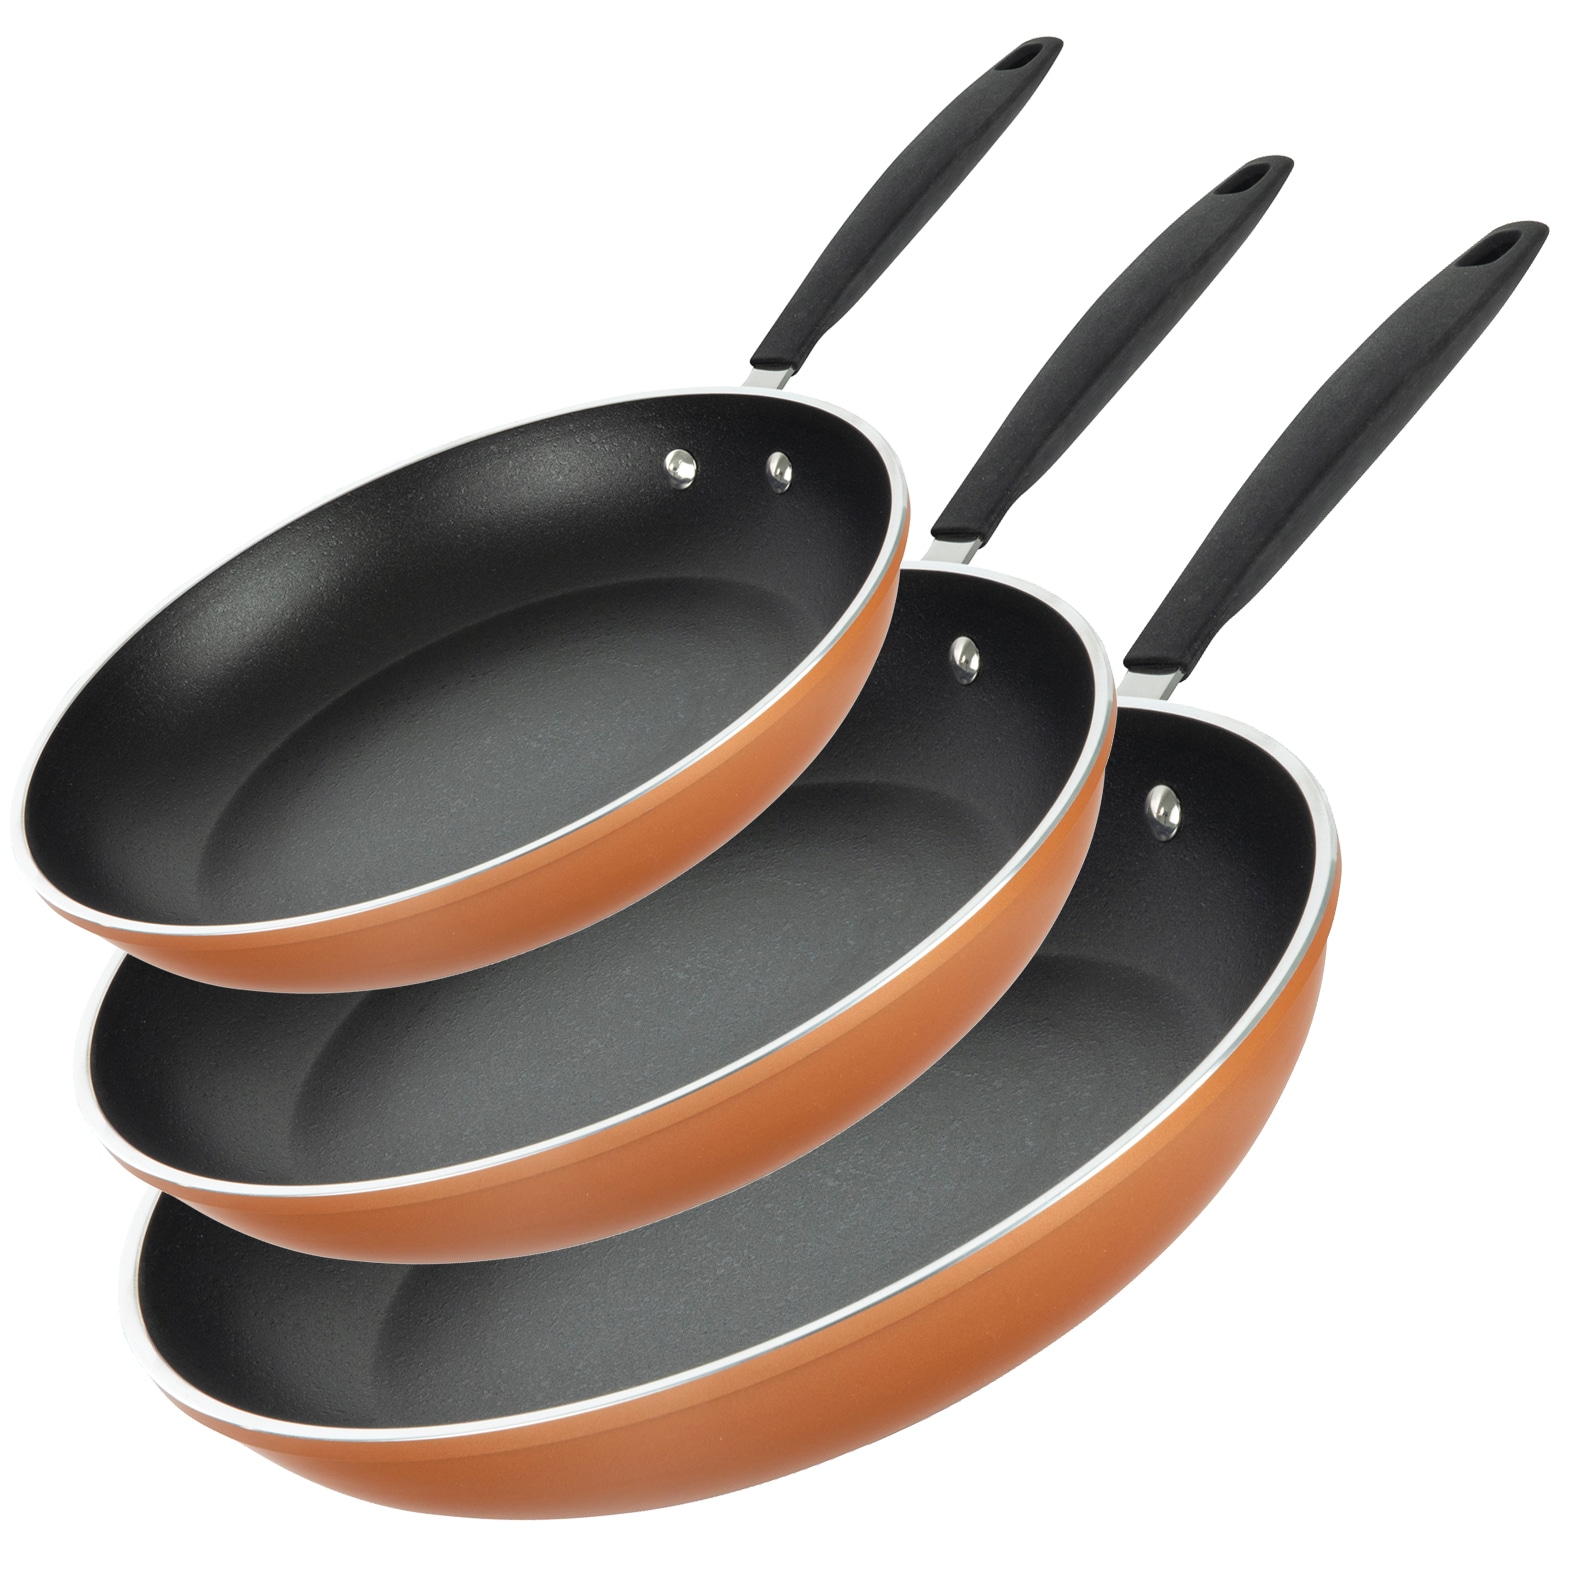 Healthy Nonstick Ceramic Coated Frying Pan - 3 Pcs Eco Friendly Durable Fry  Pan Cookware Set (8, 10 & 11 Pans) (Copper Stainless Steel)